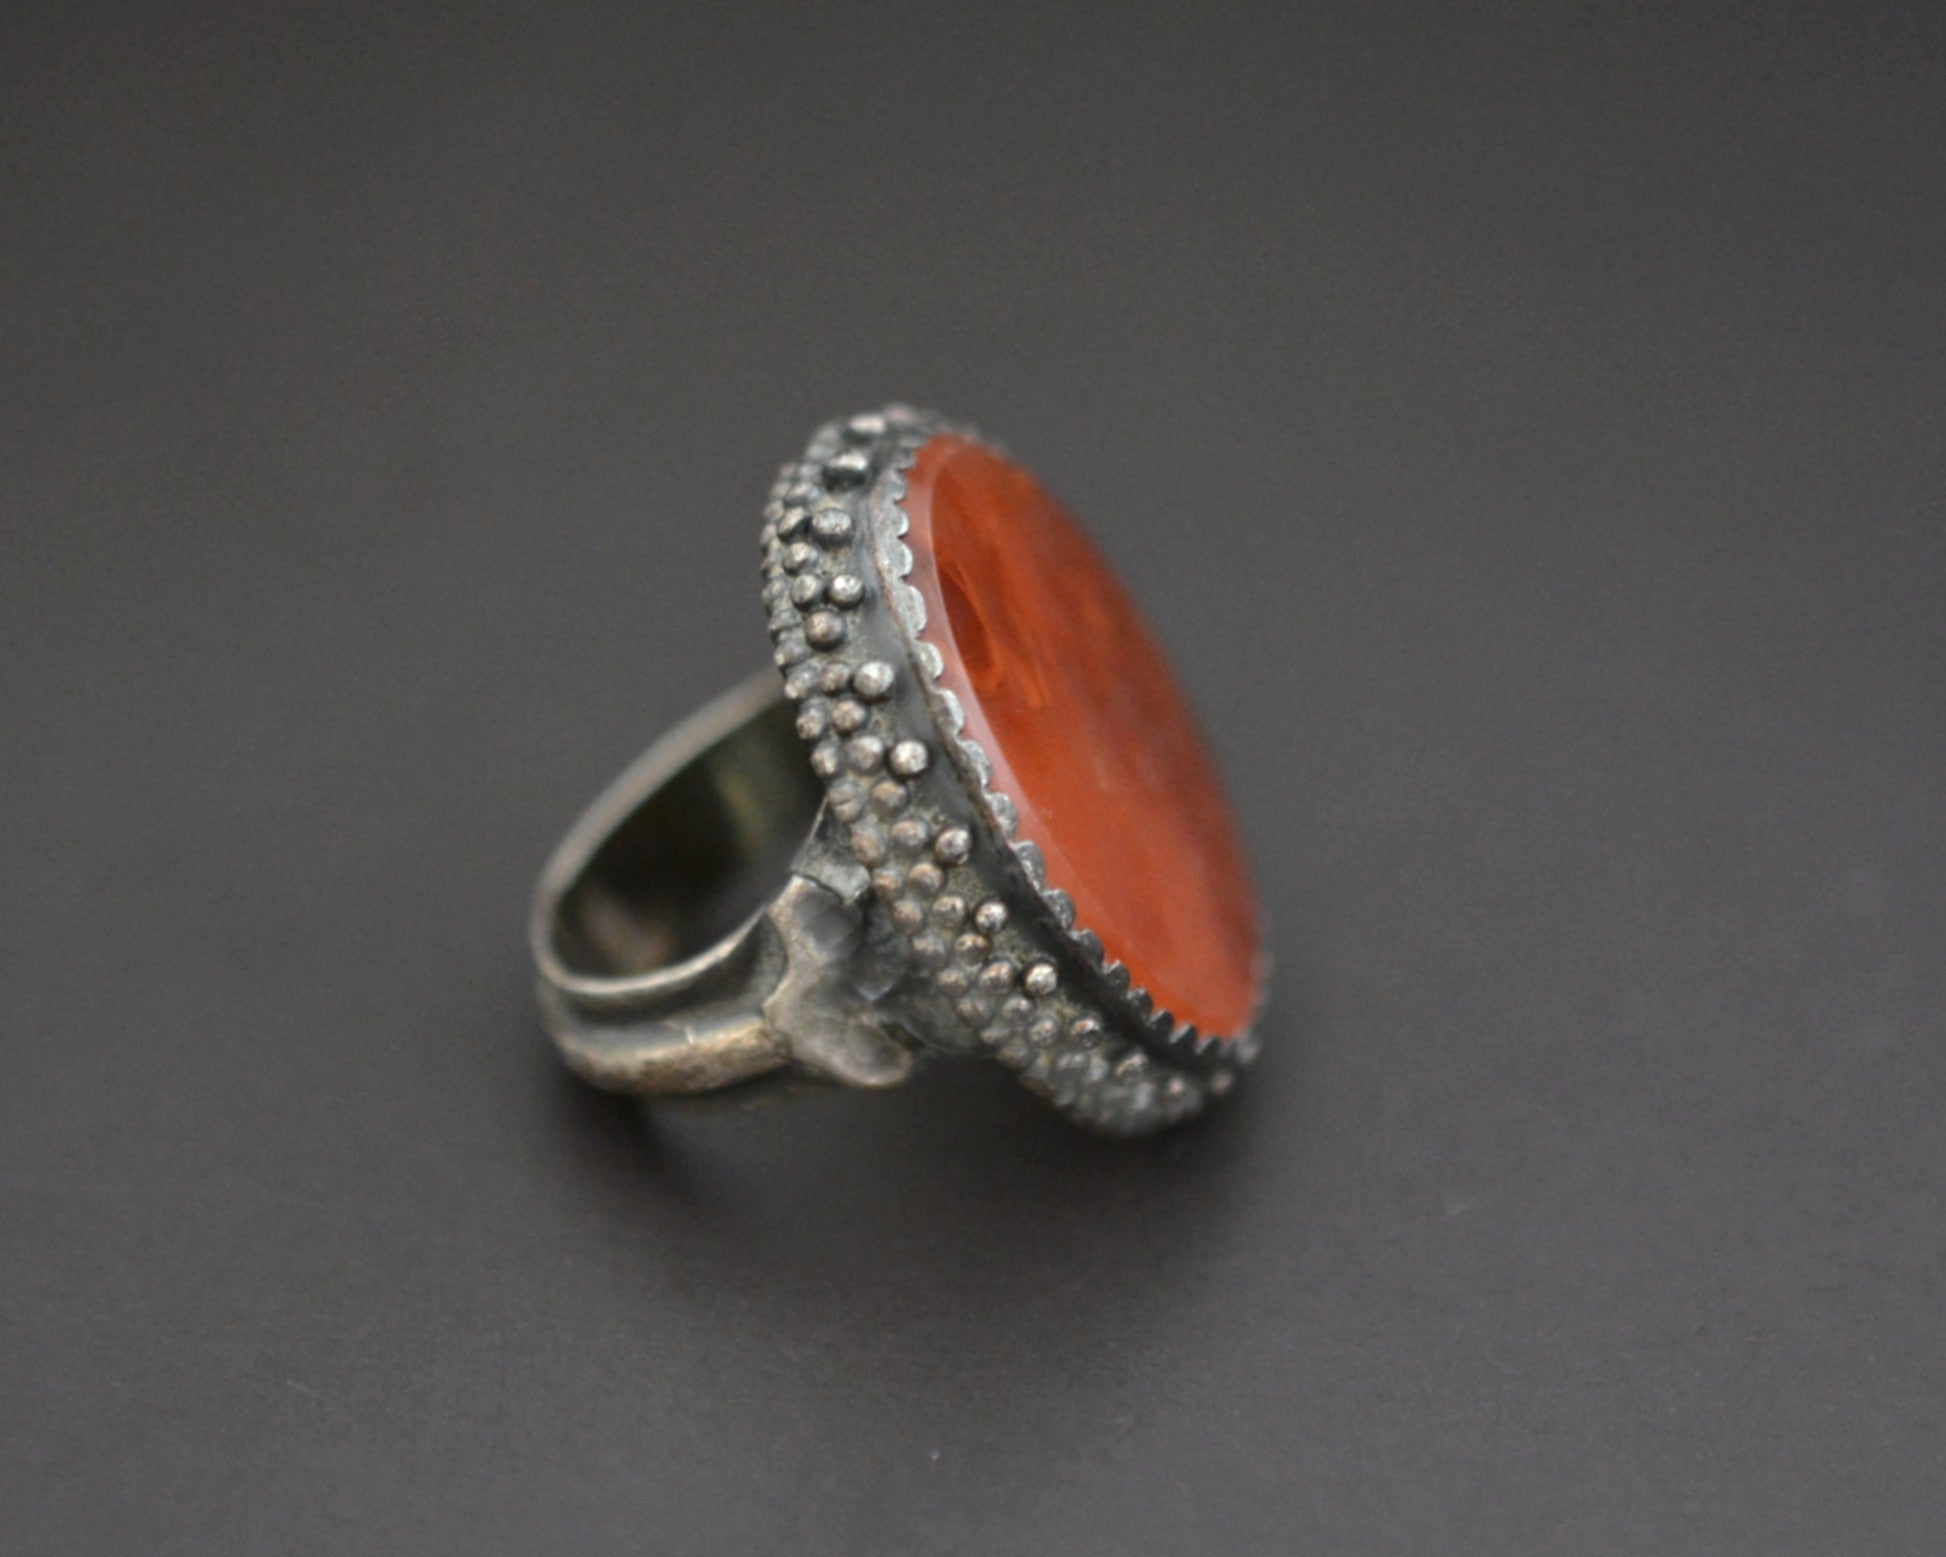 Reserved for I. - Large Ethnic Carnelian Ring - Size 8